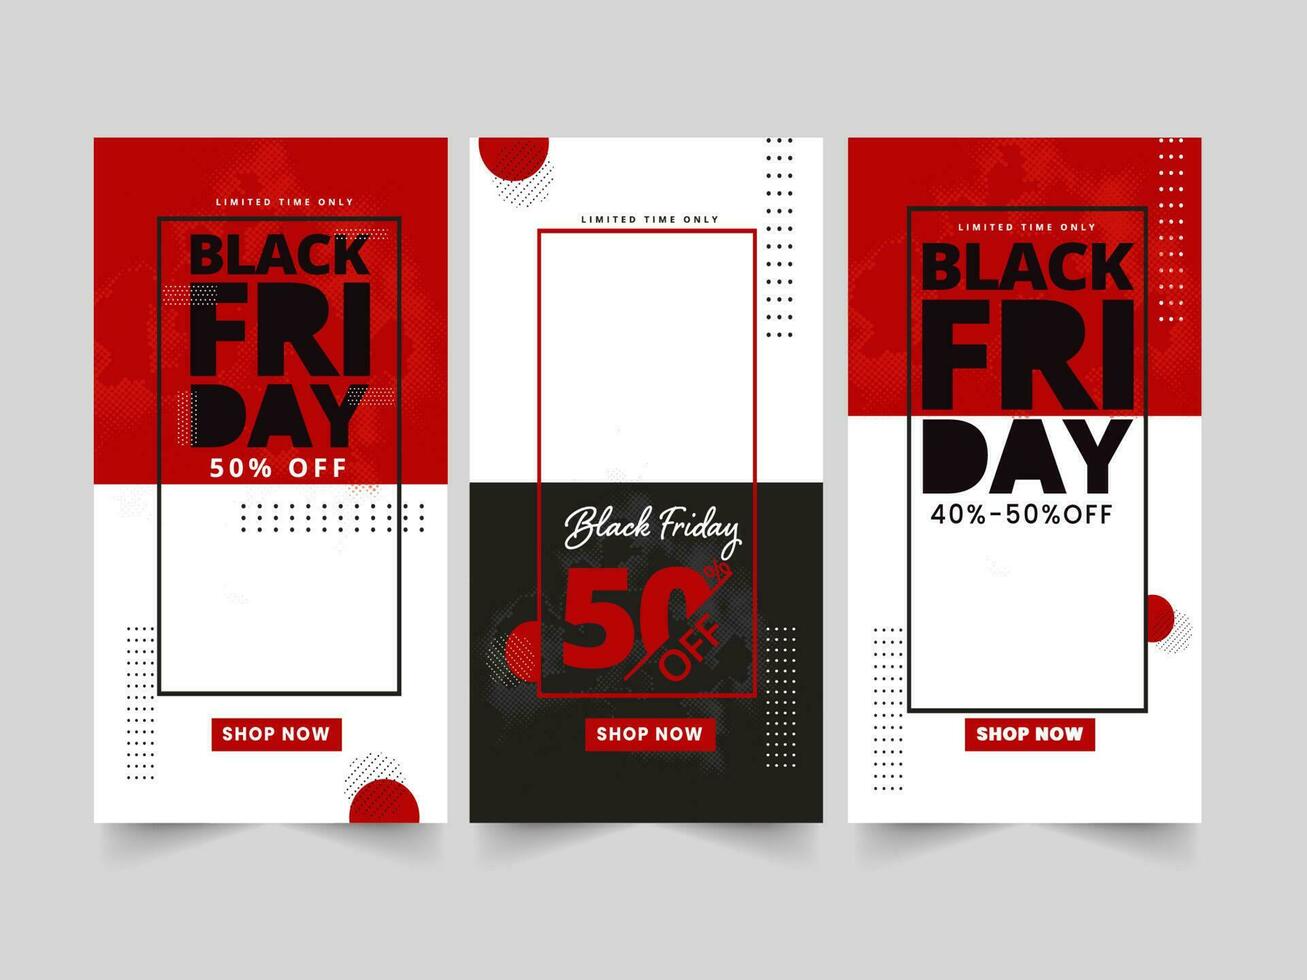 Black Friday Sale Post Or Template Design With Discount Offers In Three Options. vector